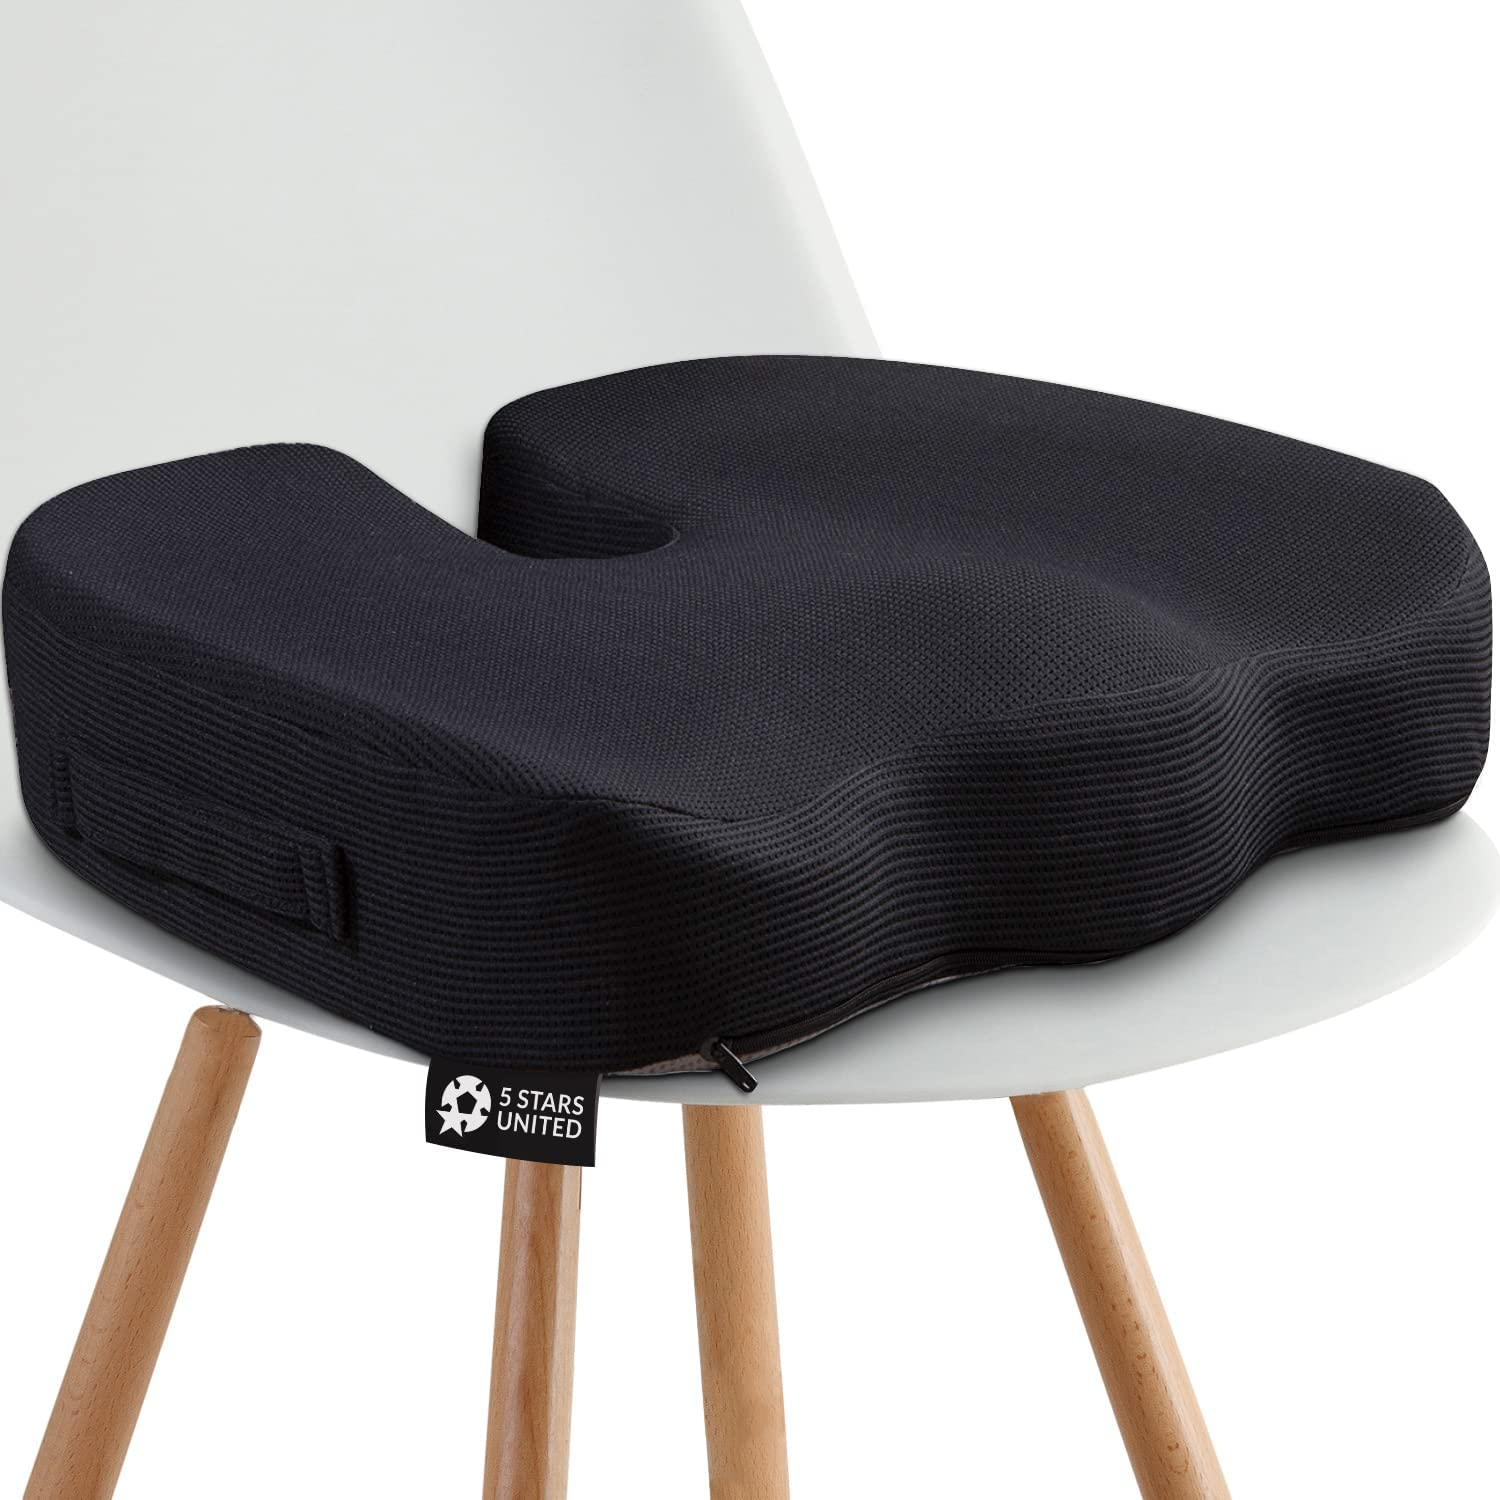 The memory foam cushion pillow on a seat